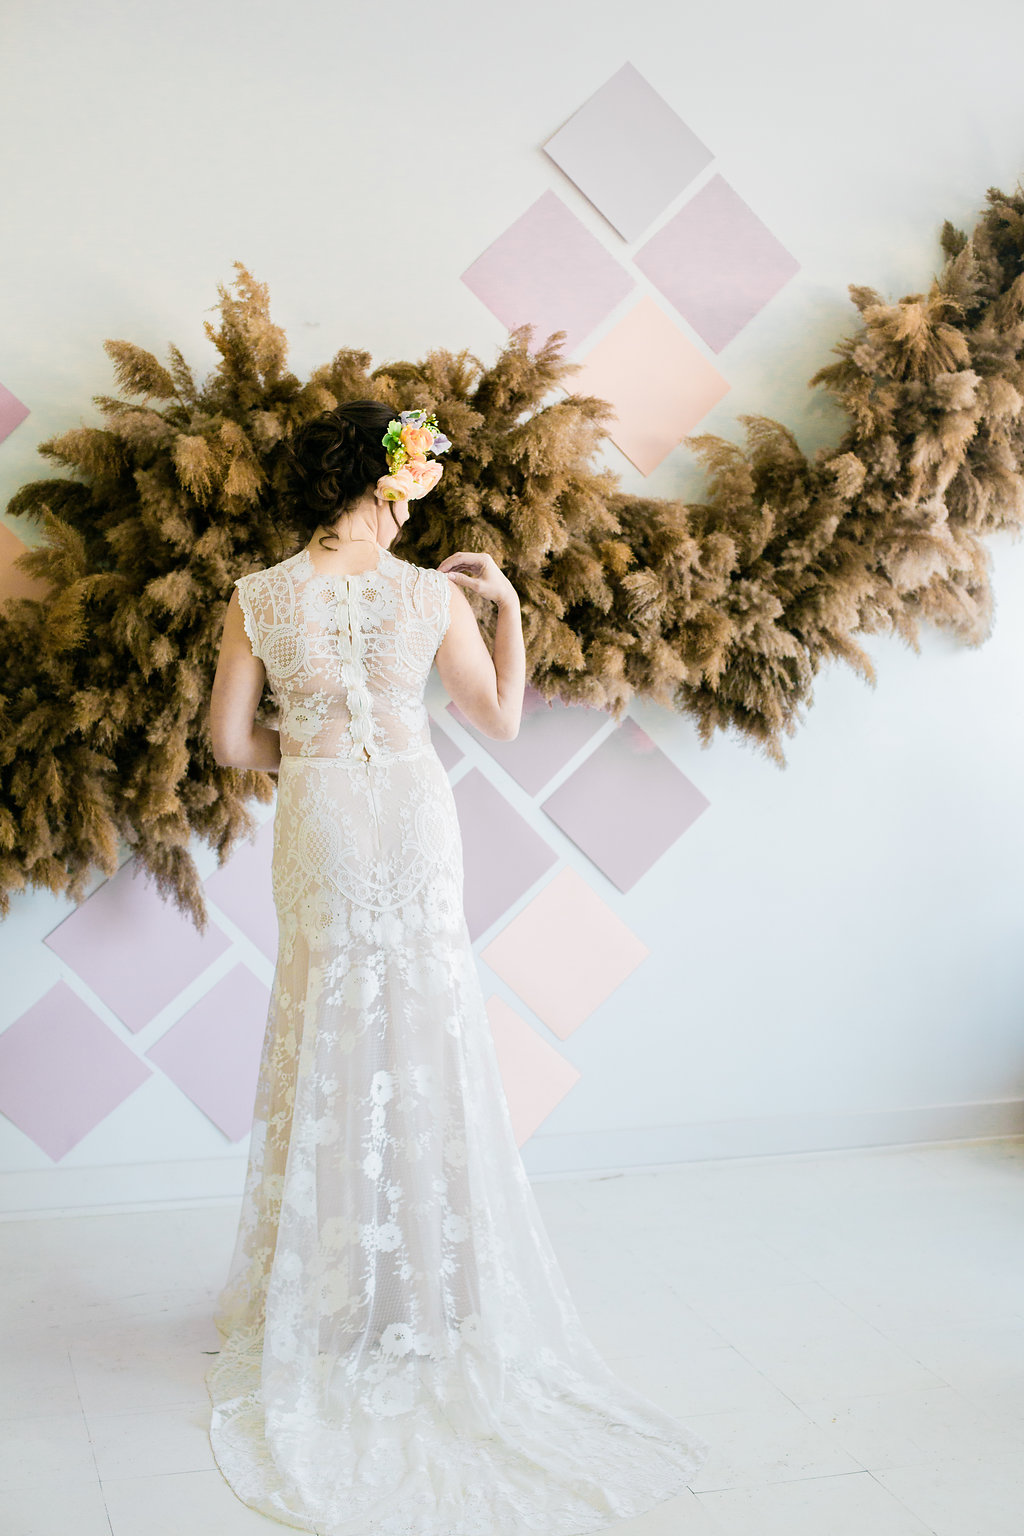 Pampas Grass Backdrop | The Day's Design 